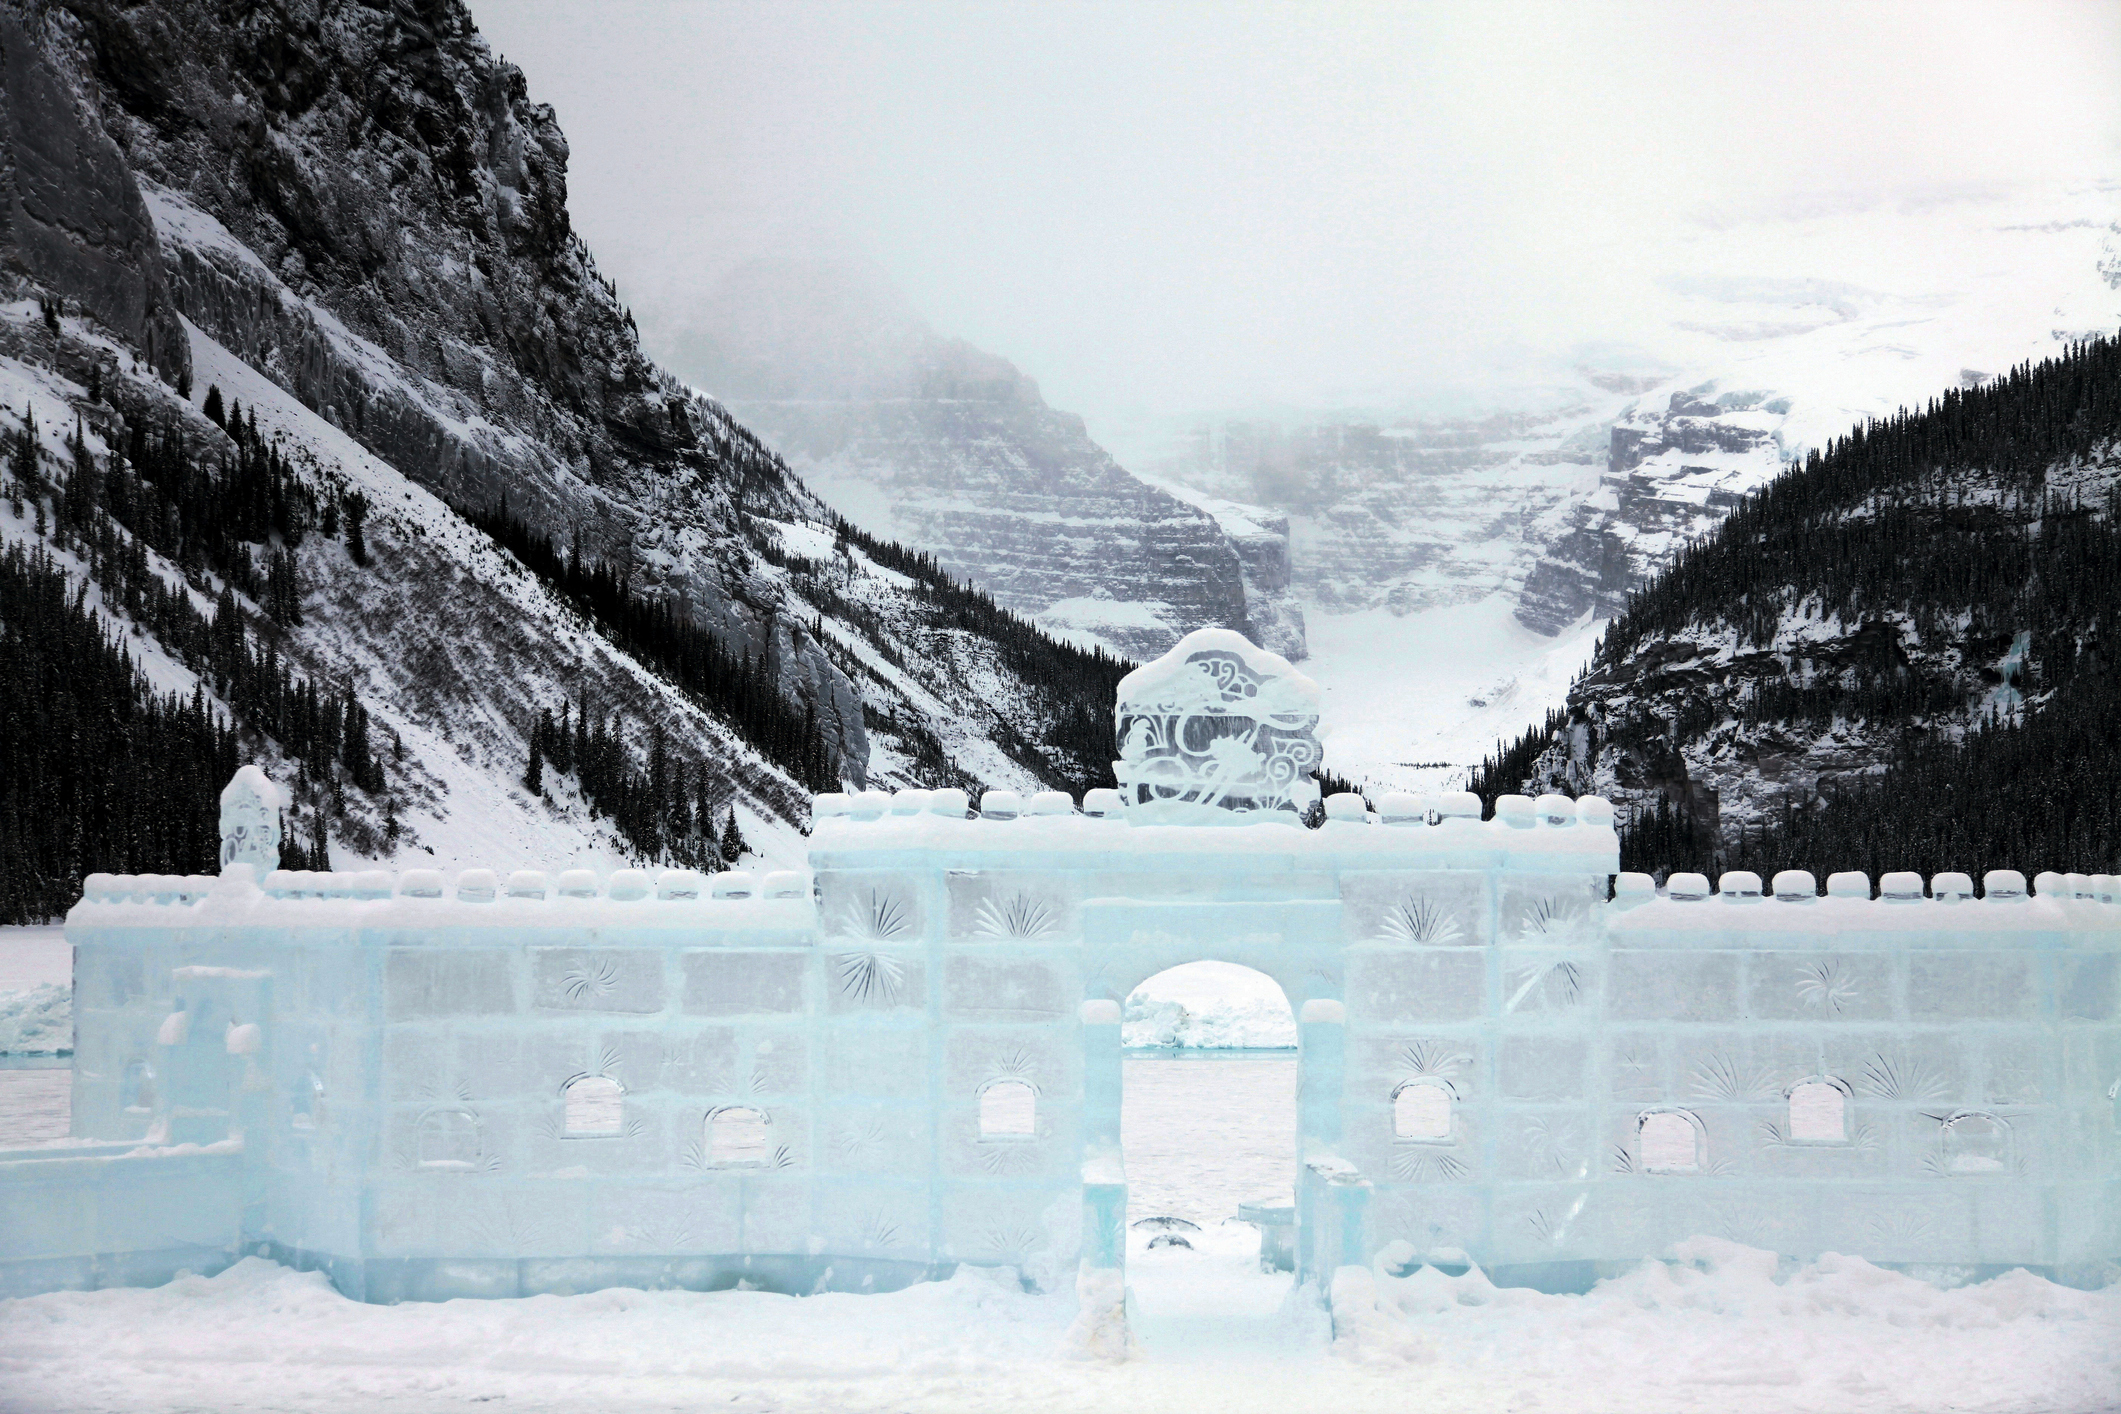 Ice sculpture castle on Lake Louise in Banff